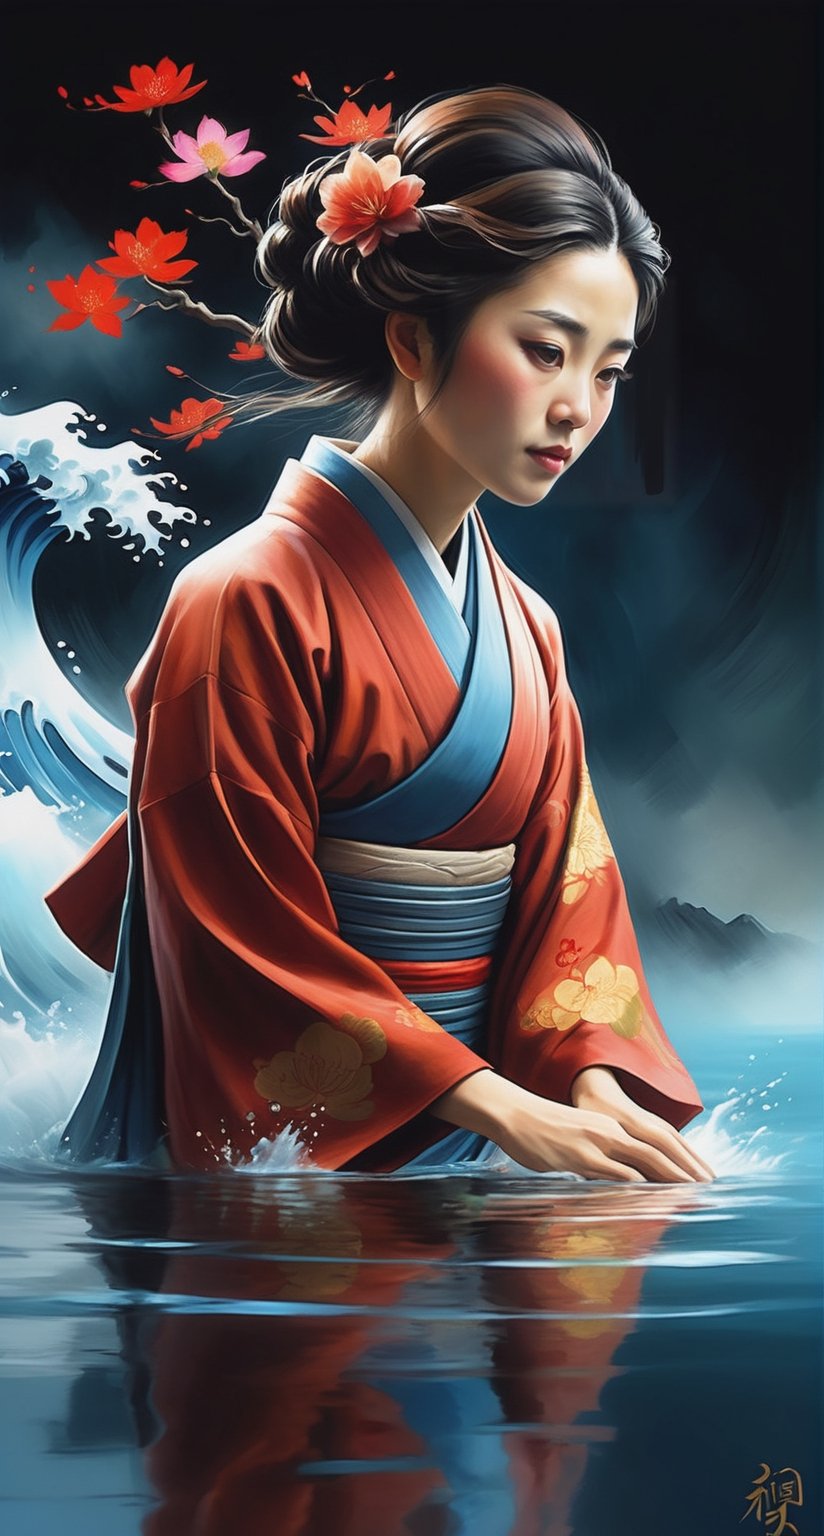 Craft a digital painting portraying a Japanese woman emerging from a Facebook profile page with meticulous attention to detail, featuring vibrant colors and dynamic water effects surrounding her. Capture the scene from various camera angles such as bottom view, top view, rear view, low angle, high angle, master shot, and extreme cinematic shot to add depth and immersion.
, in the style of esao andrews